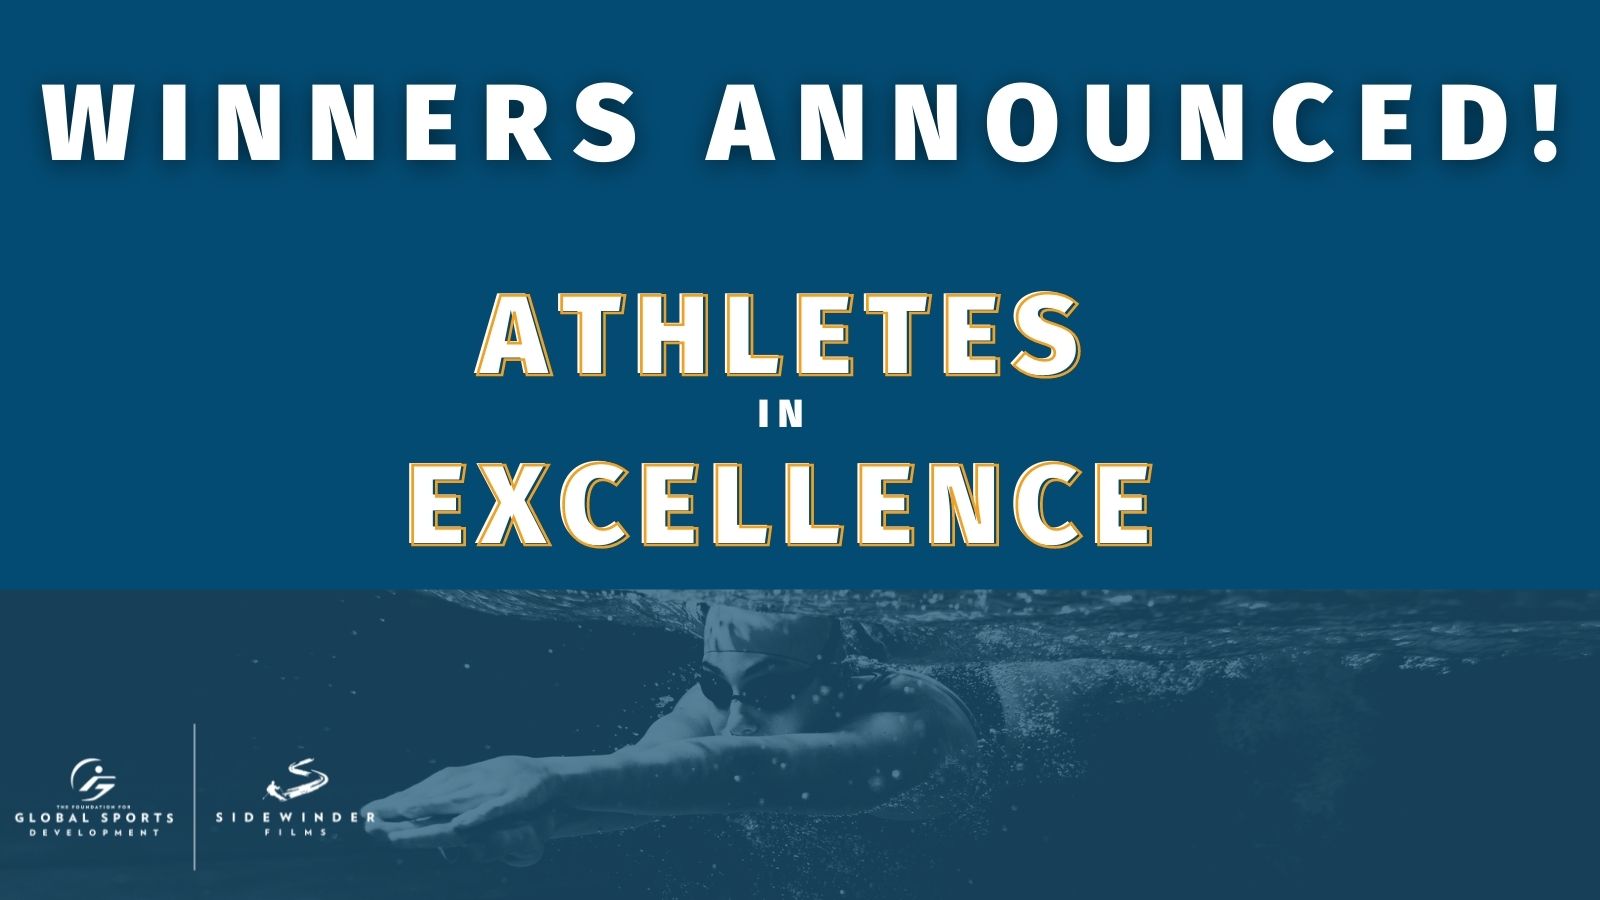 Ten Athletes Selected to Receive The Foundation for Global Sports Development’s 2021 Athletes in Excellence Award